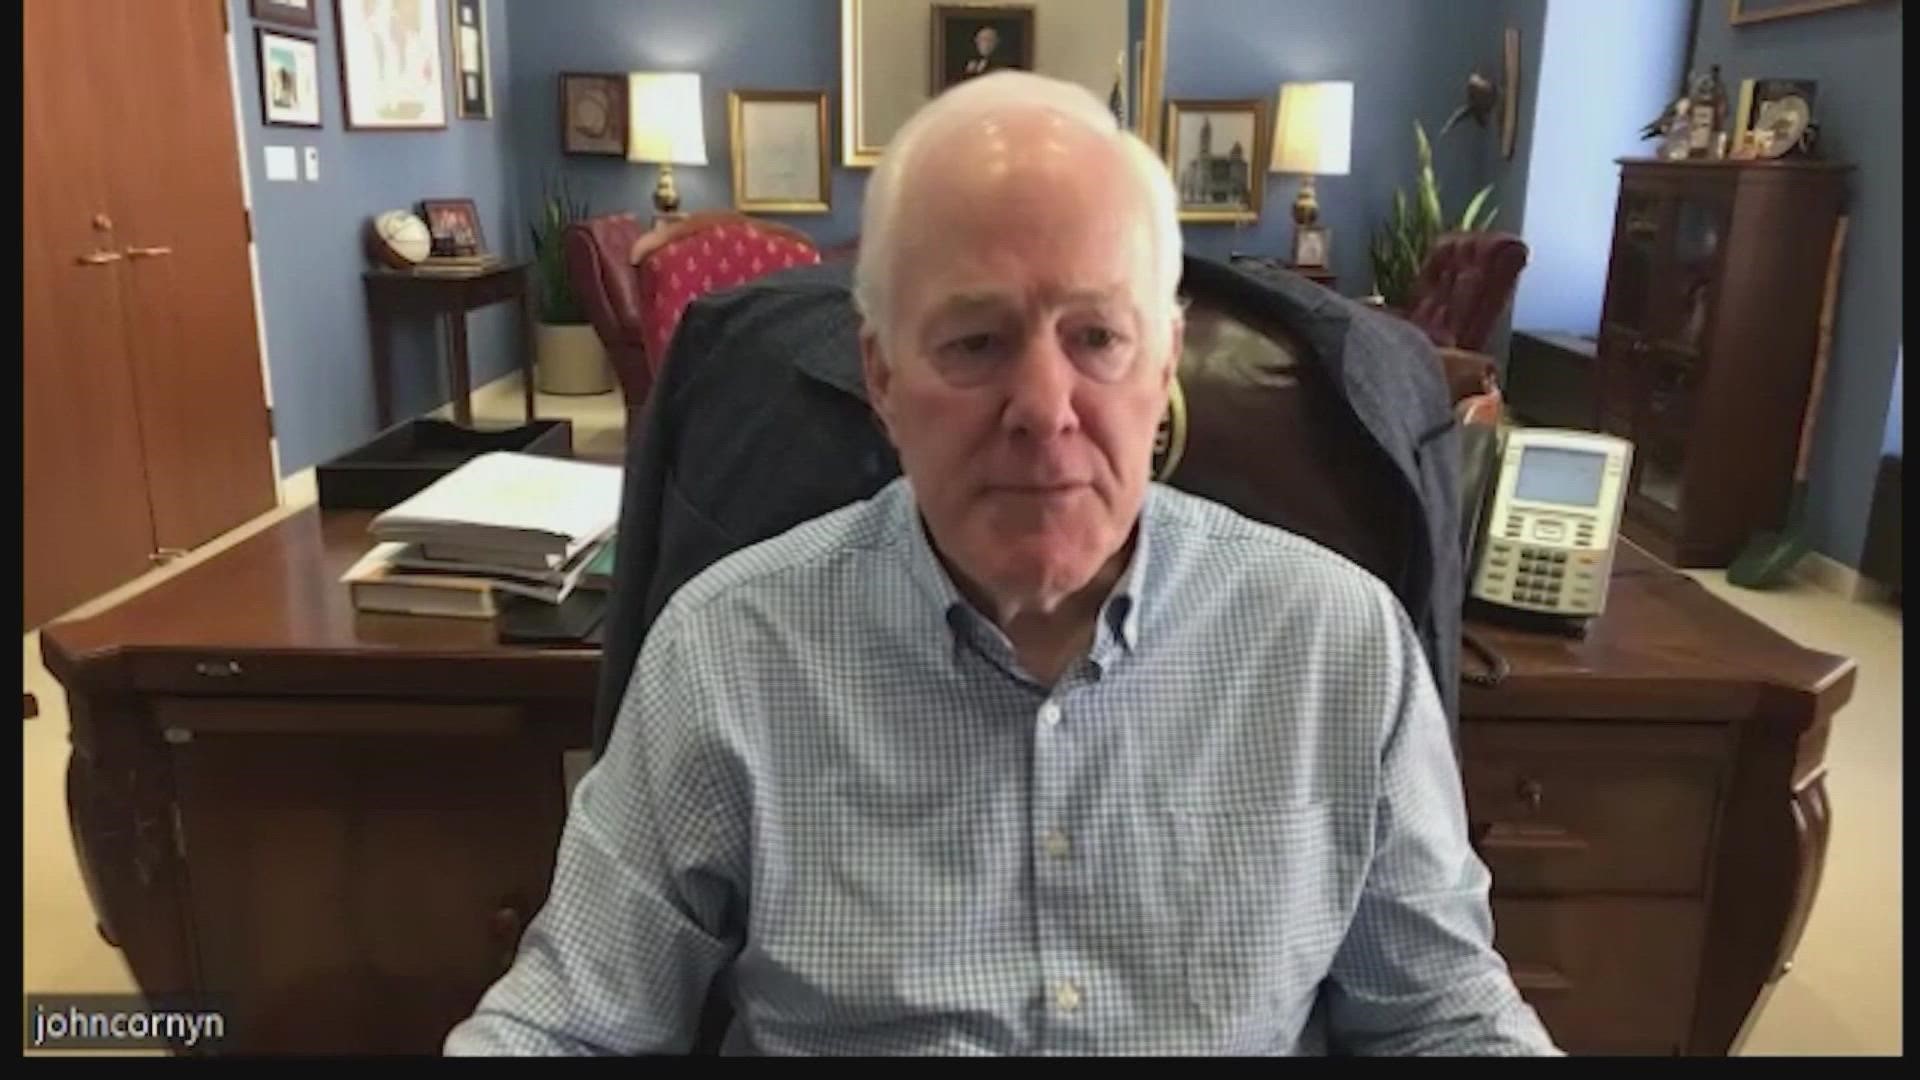 The ‘Bipartisan Safer Communities Act' Sen. Cornyn negotiated is the most significant gun-related legislation in decades.